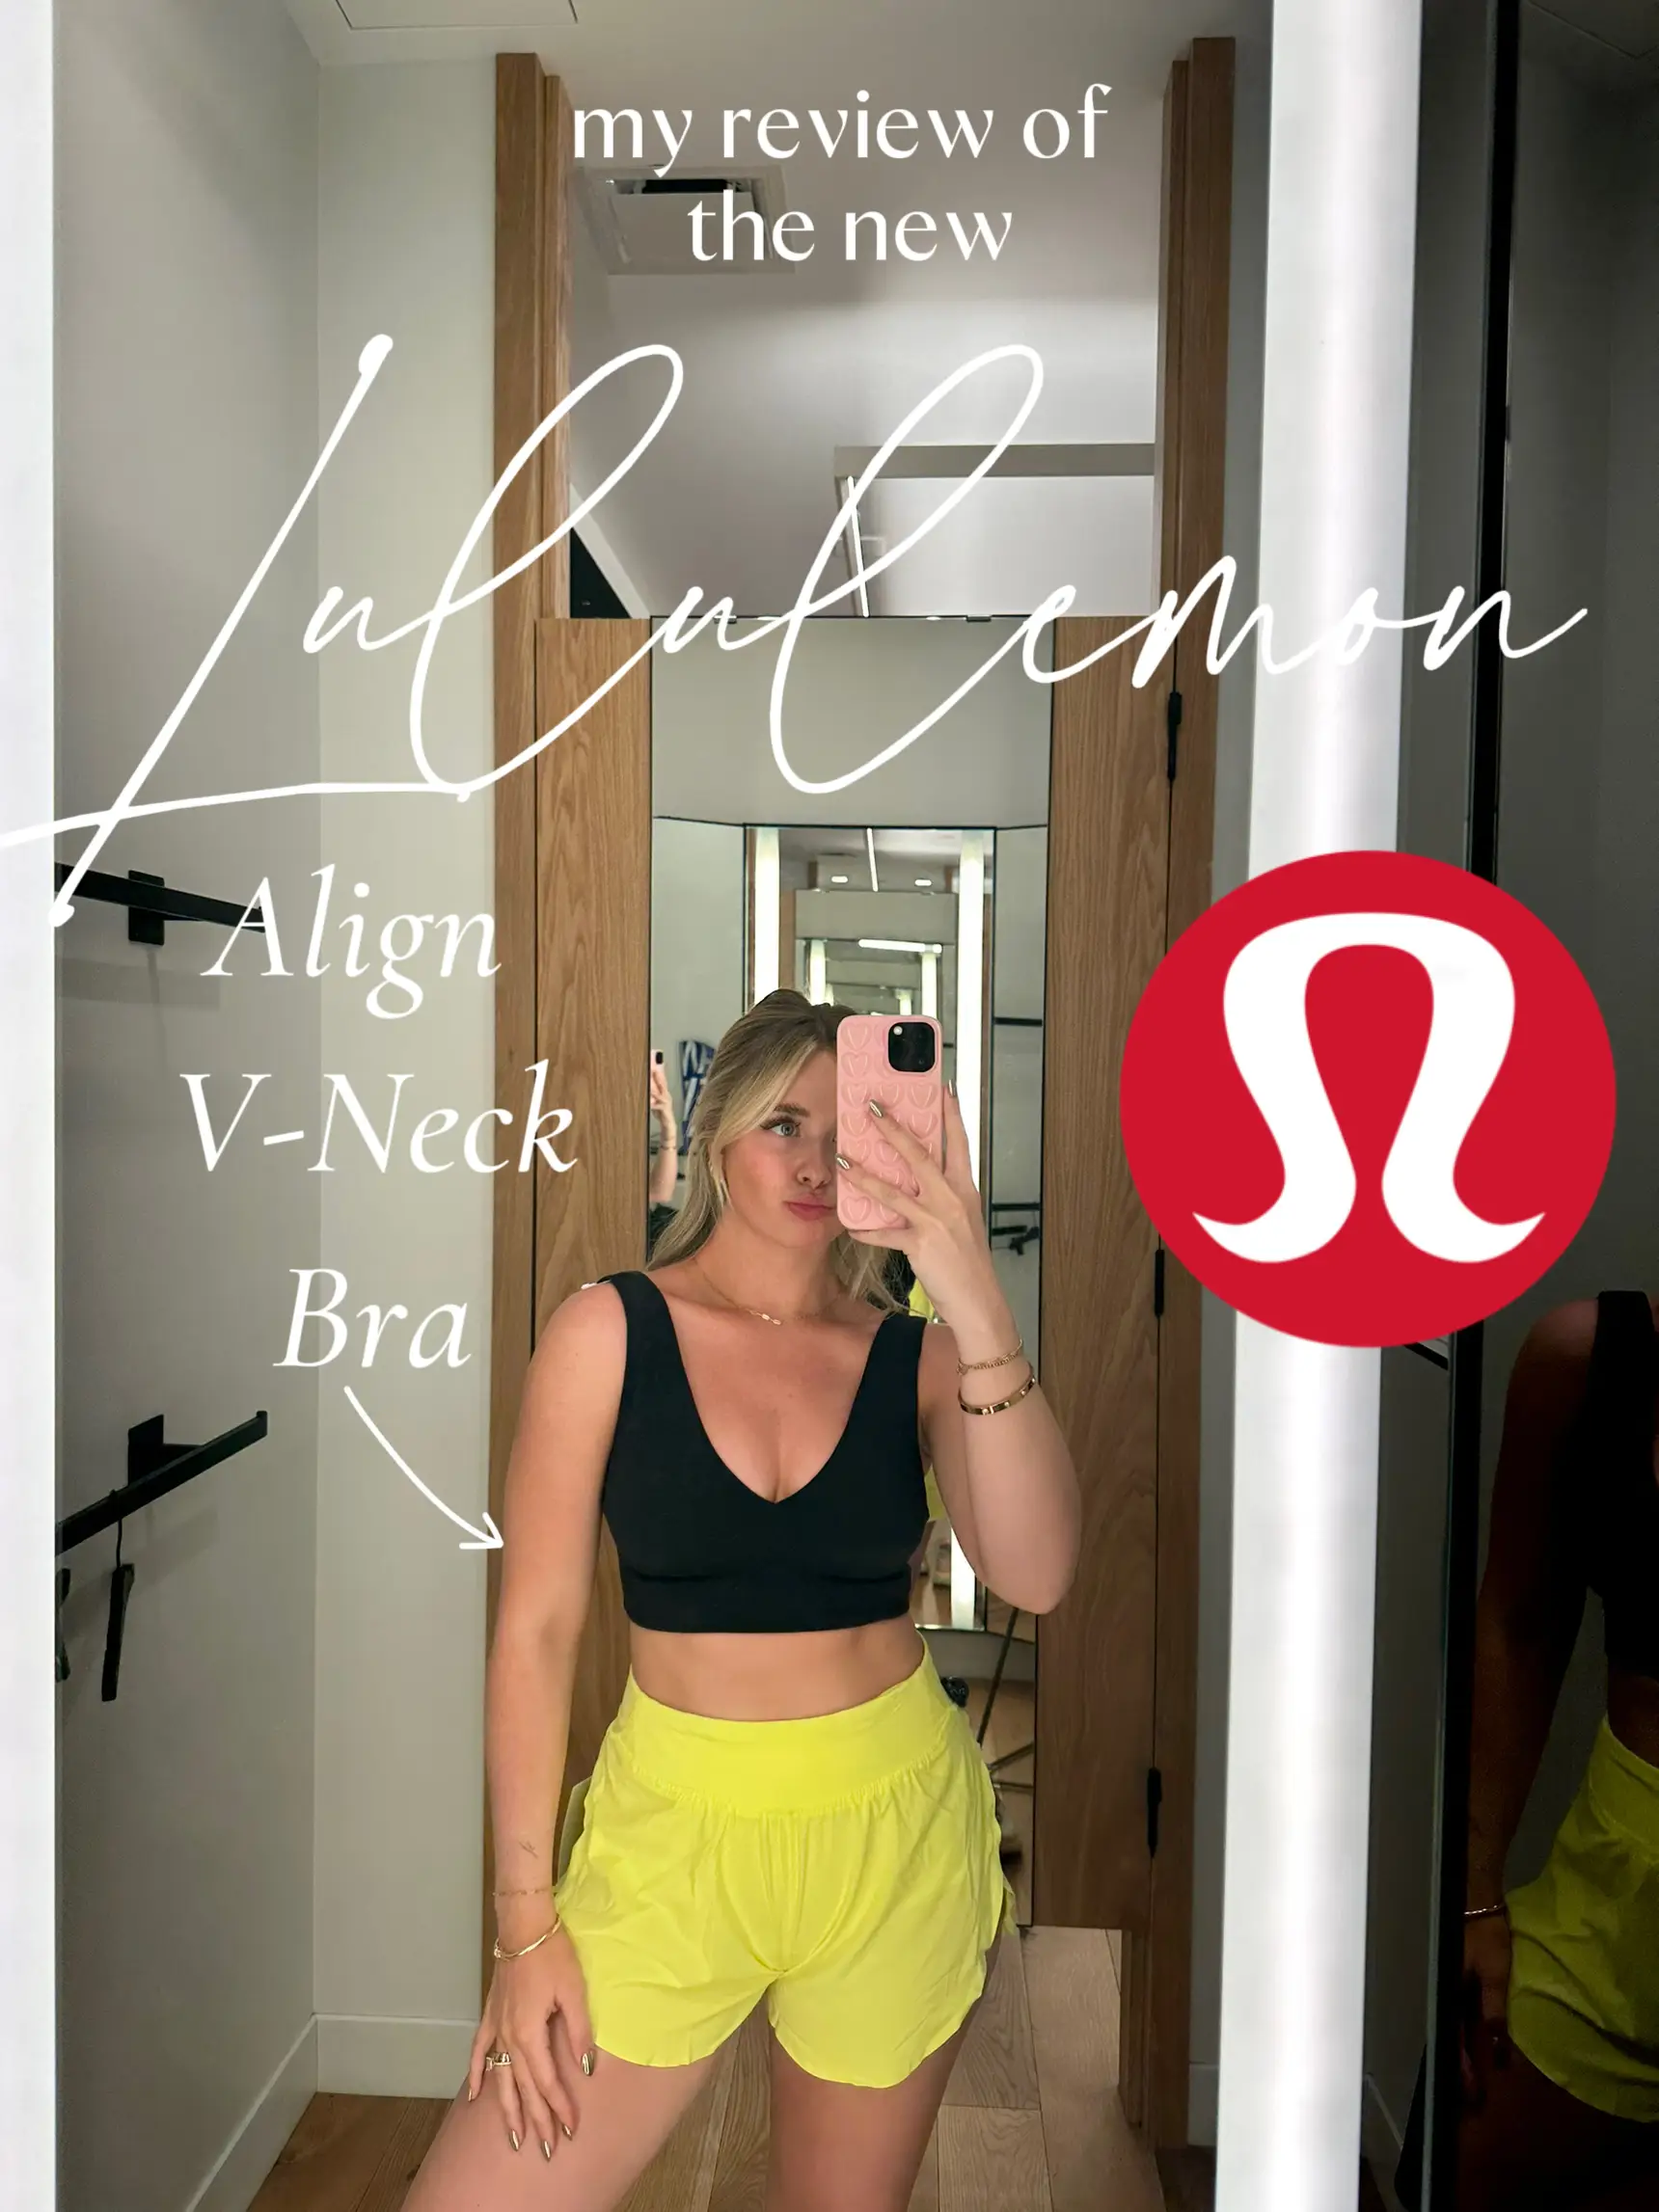 Was wondering what the hype is about in the Lululemon Align